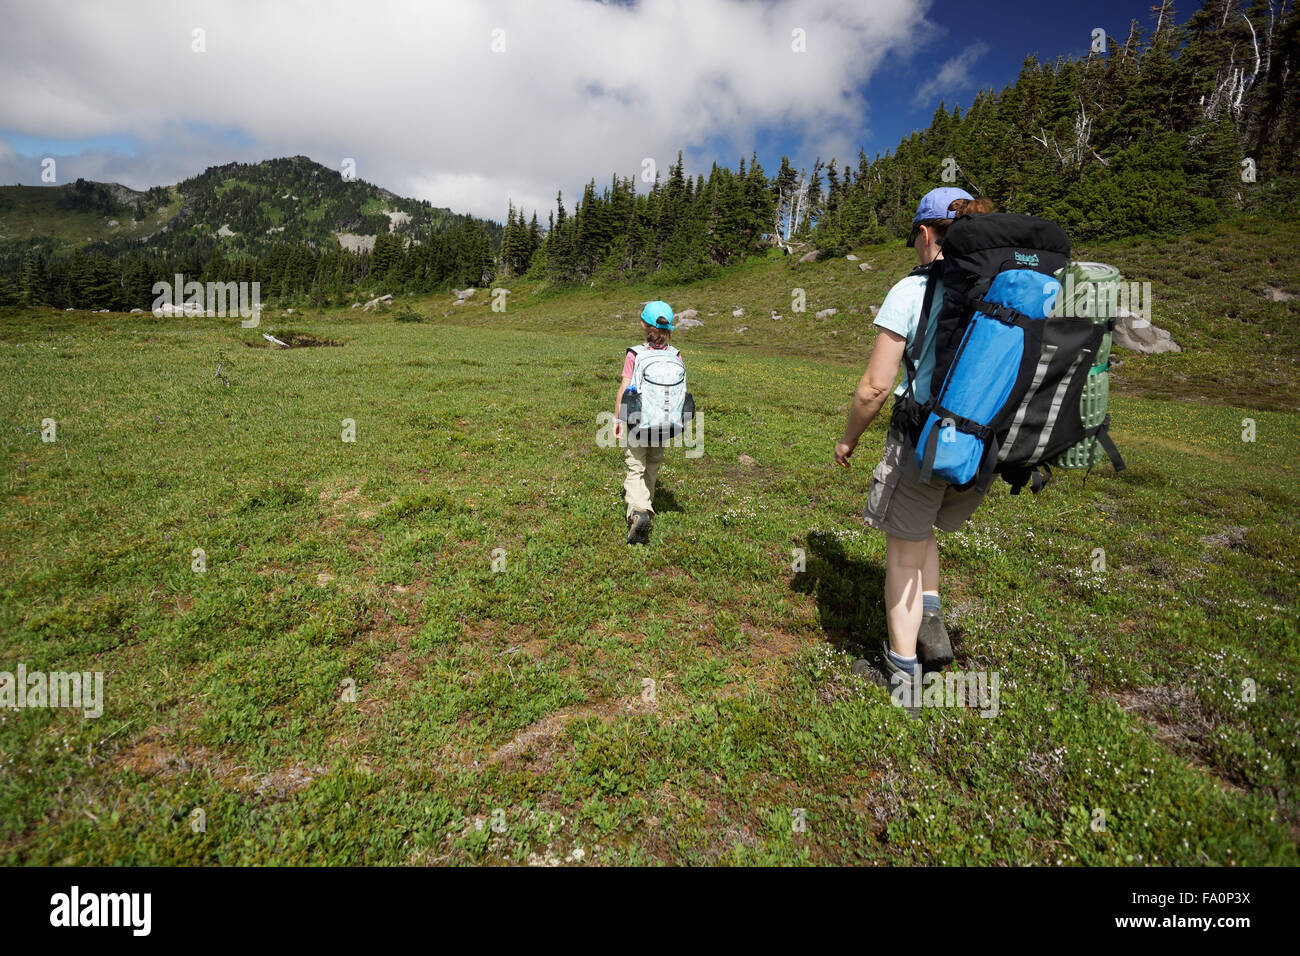 Female child and mother backpacking through meadow in Spray Park cross-country zone, Mount Rainier National Park, Washington Sta Stock Photo